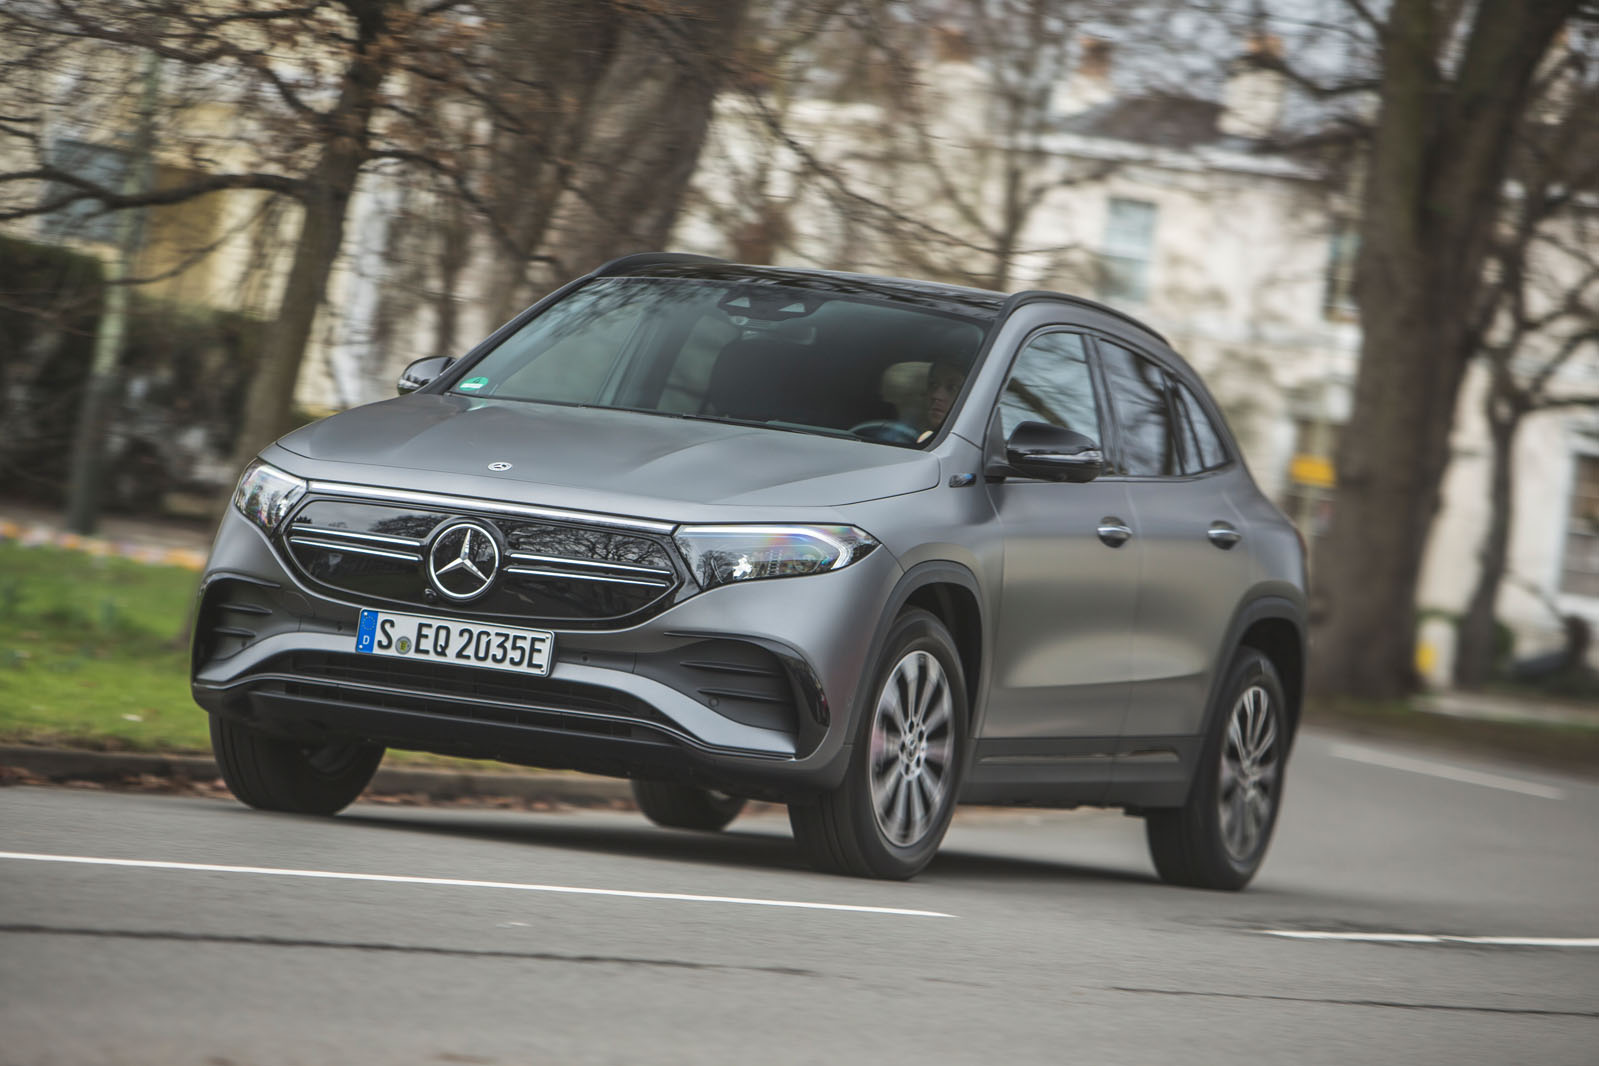 https://www.autocar.co.uk/sites/autocar.co.uk/files/images/car-reviews/first-drives/legacy/1-mercedes-benz-eqa-2021-uk-first-drive-review-hero-front.jpg